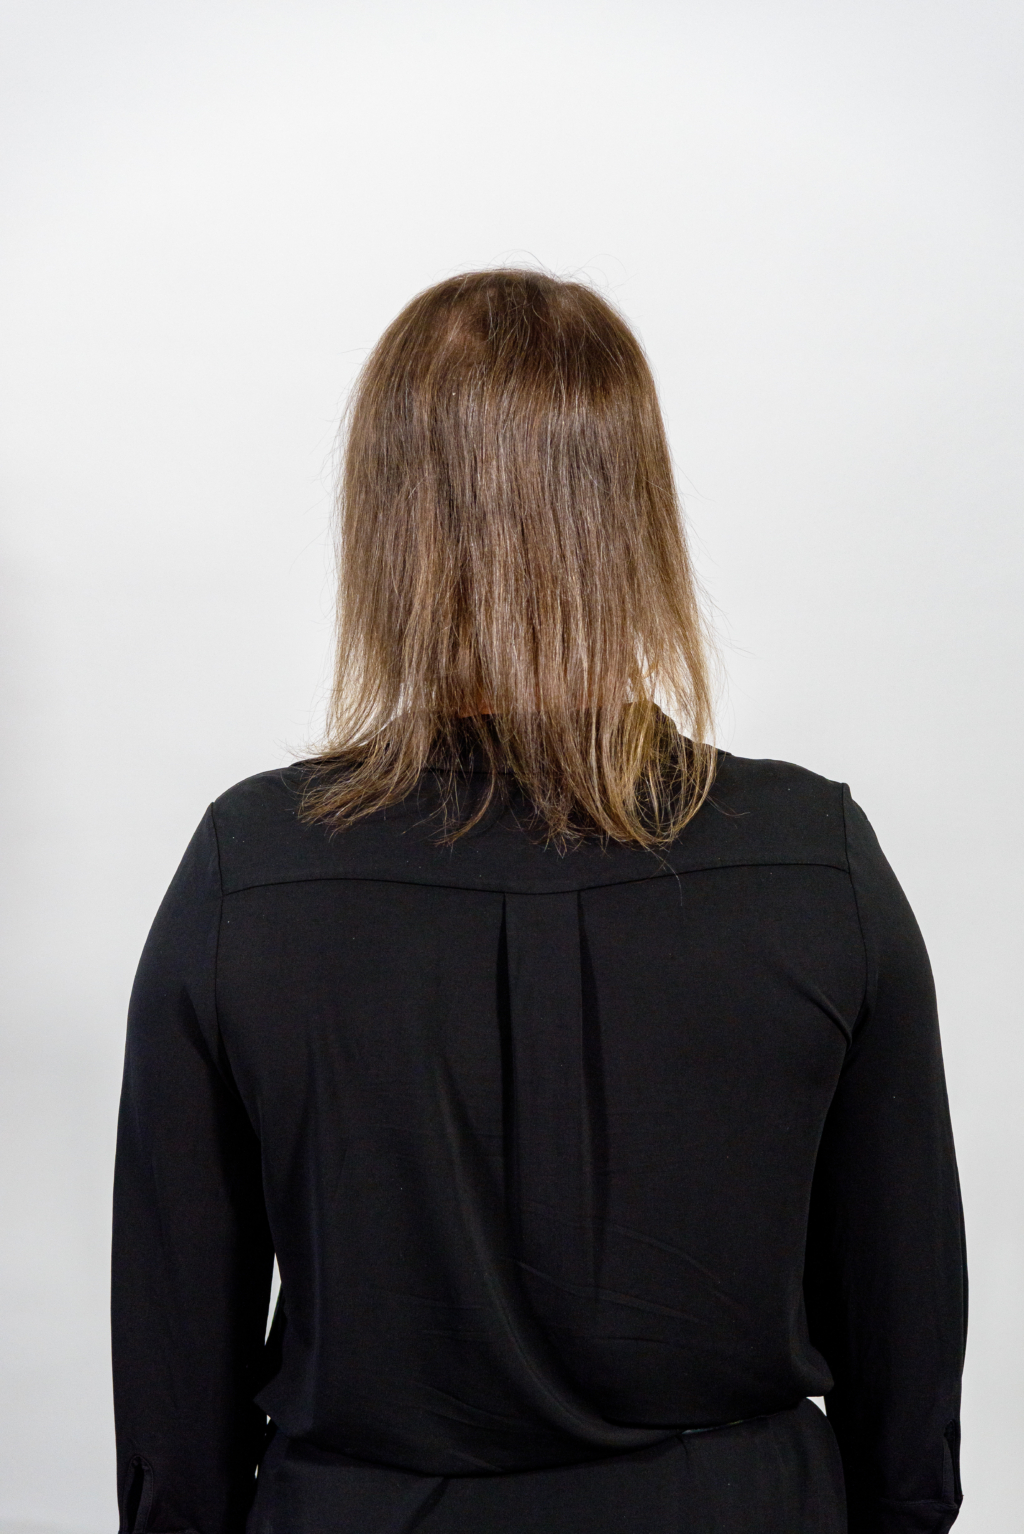 Woman from behind with short thin hair